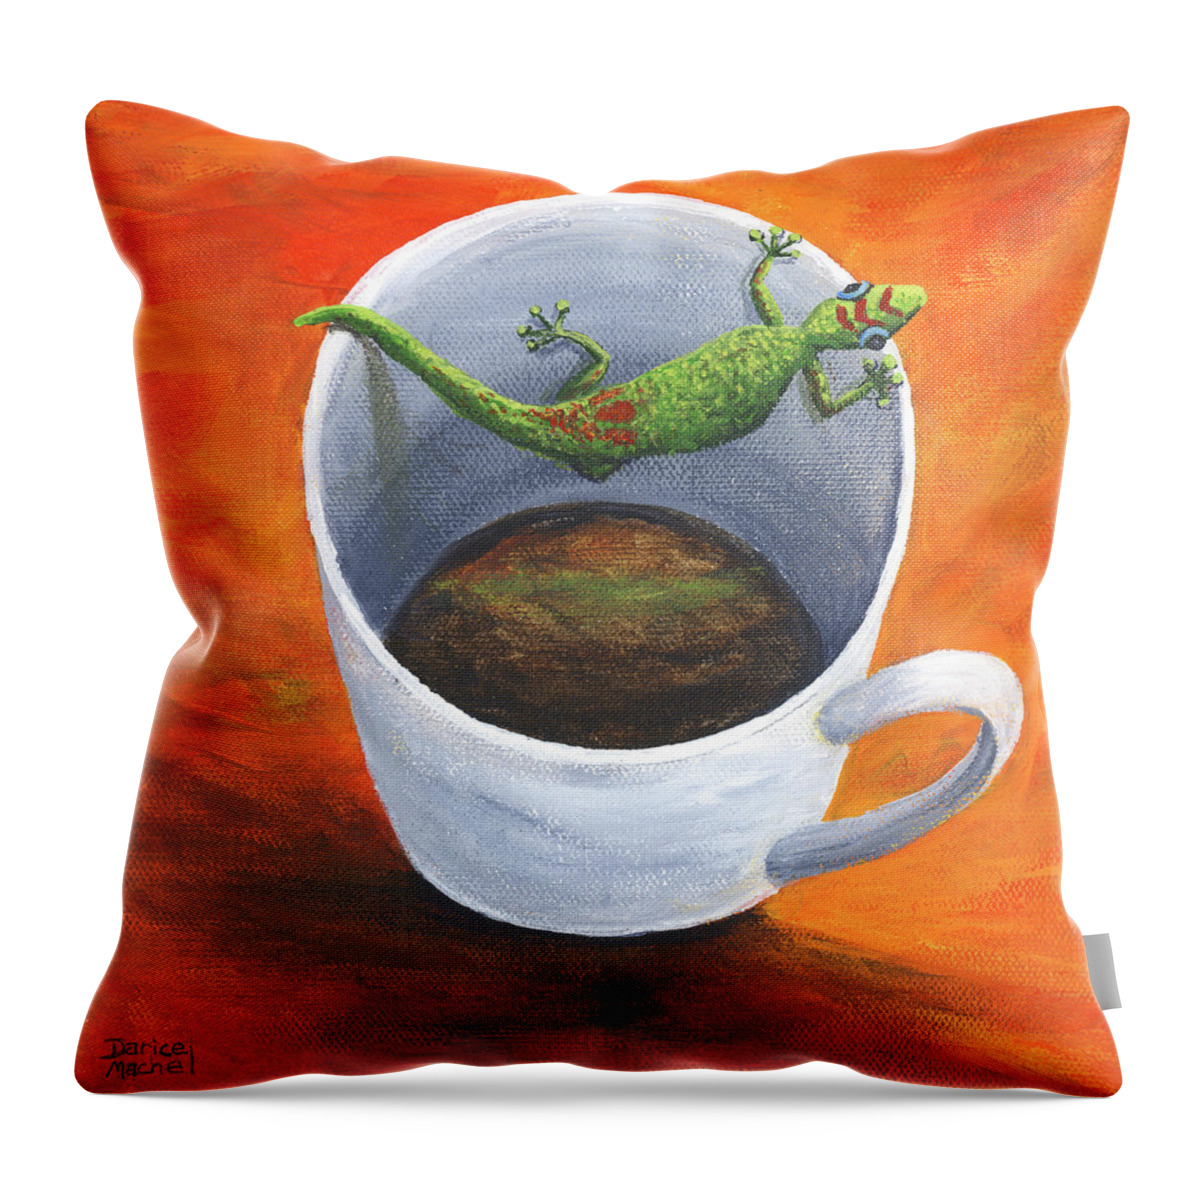 Animal Throw Pillow featuring the painting Coffee With A Friend by Darice Machel McGuire